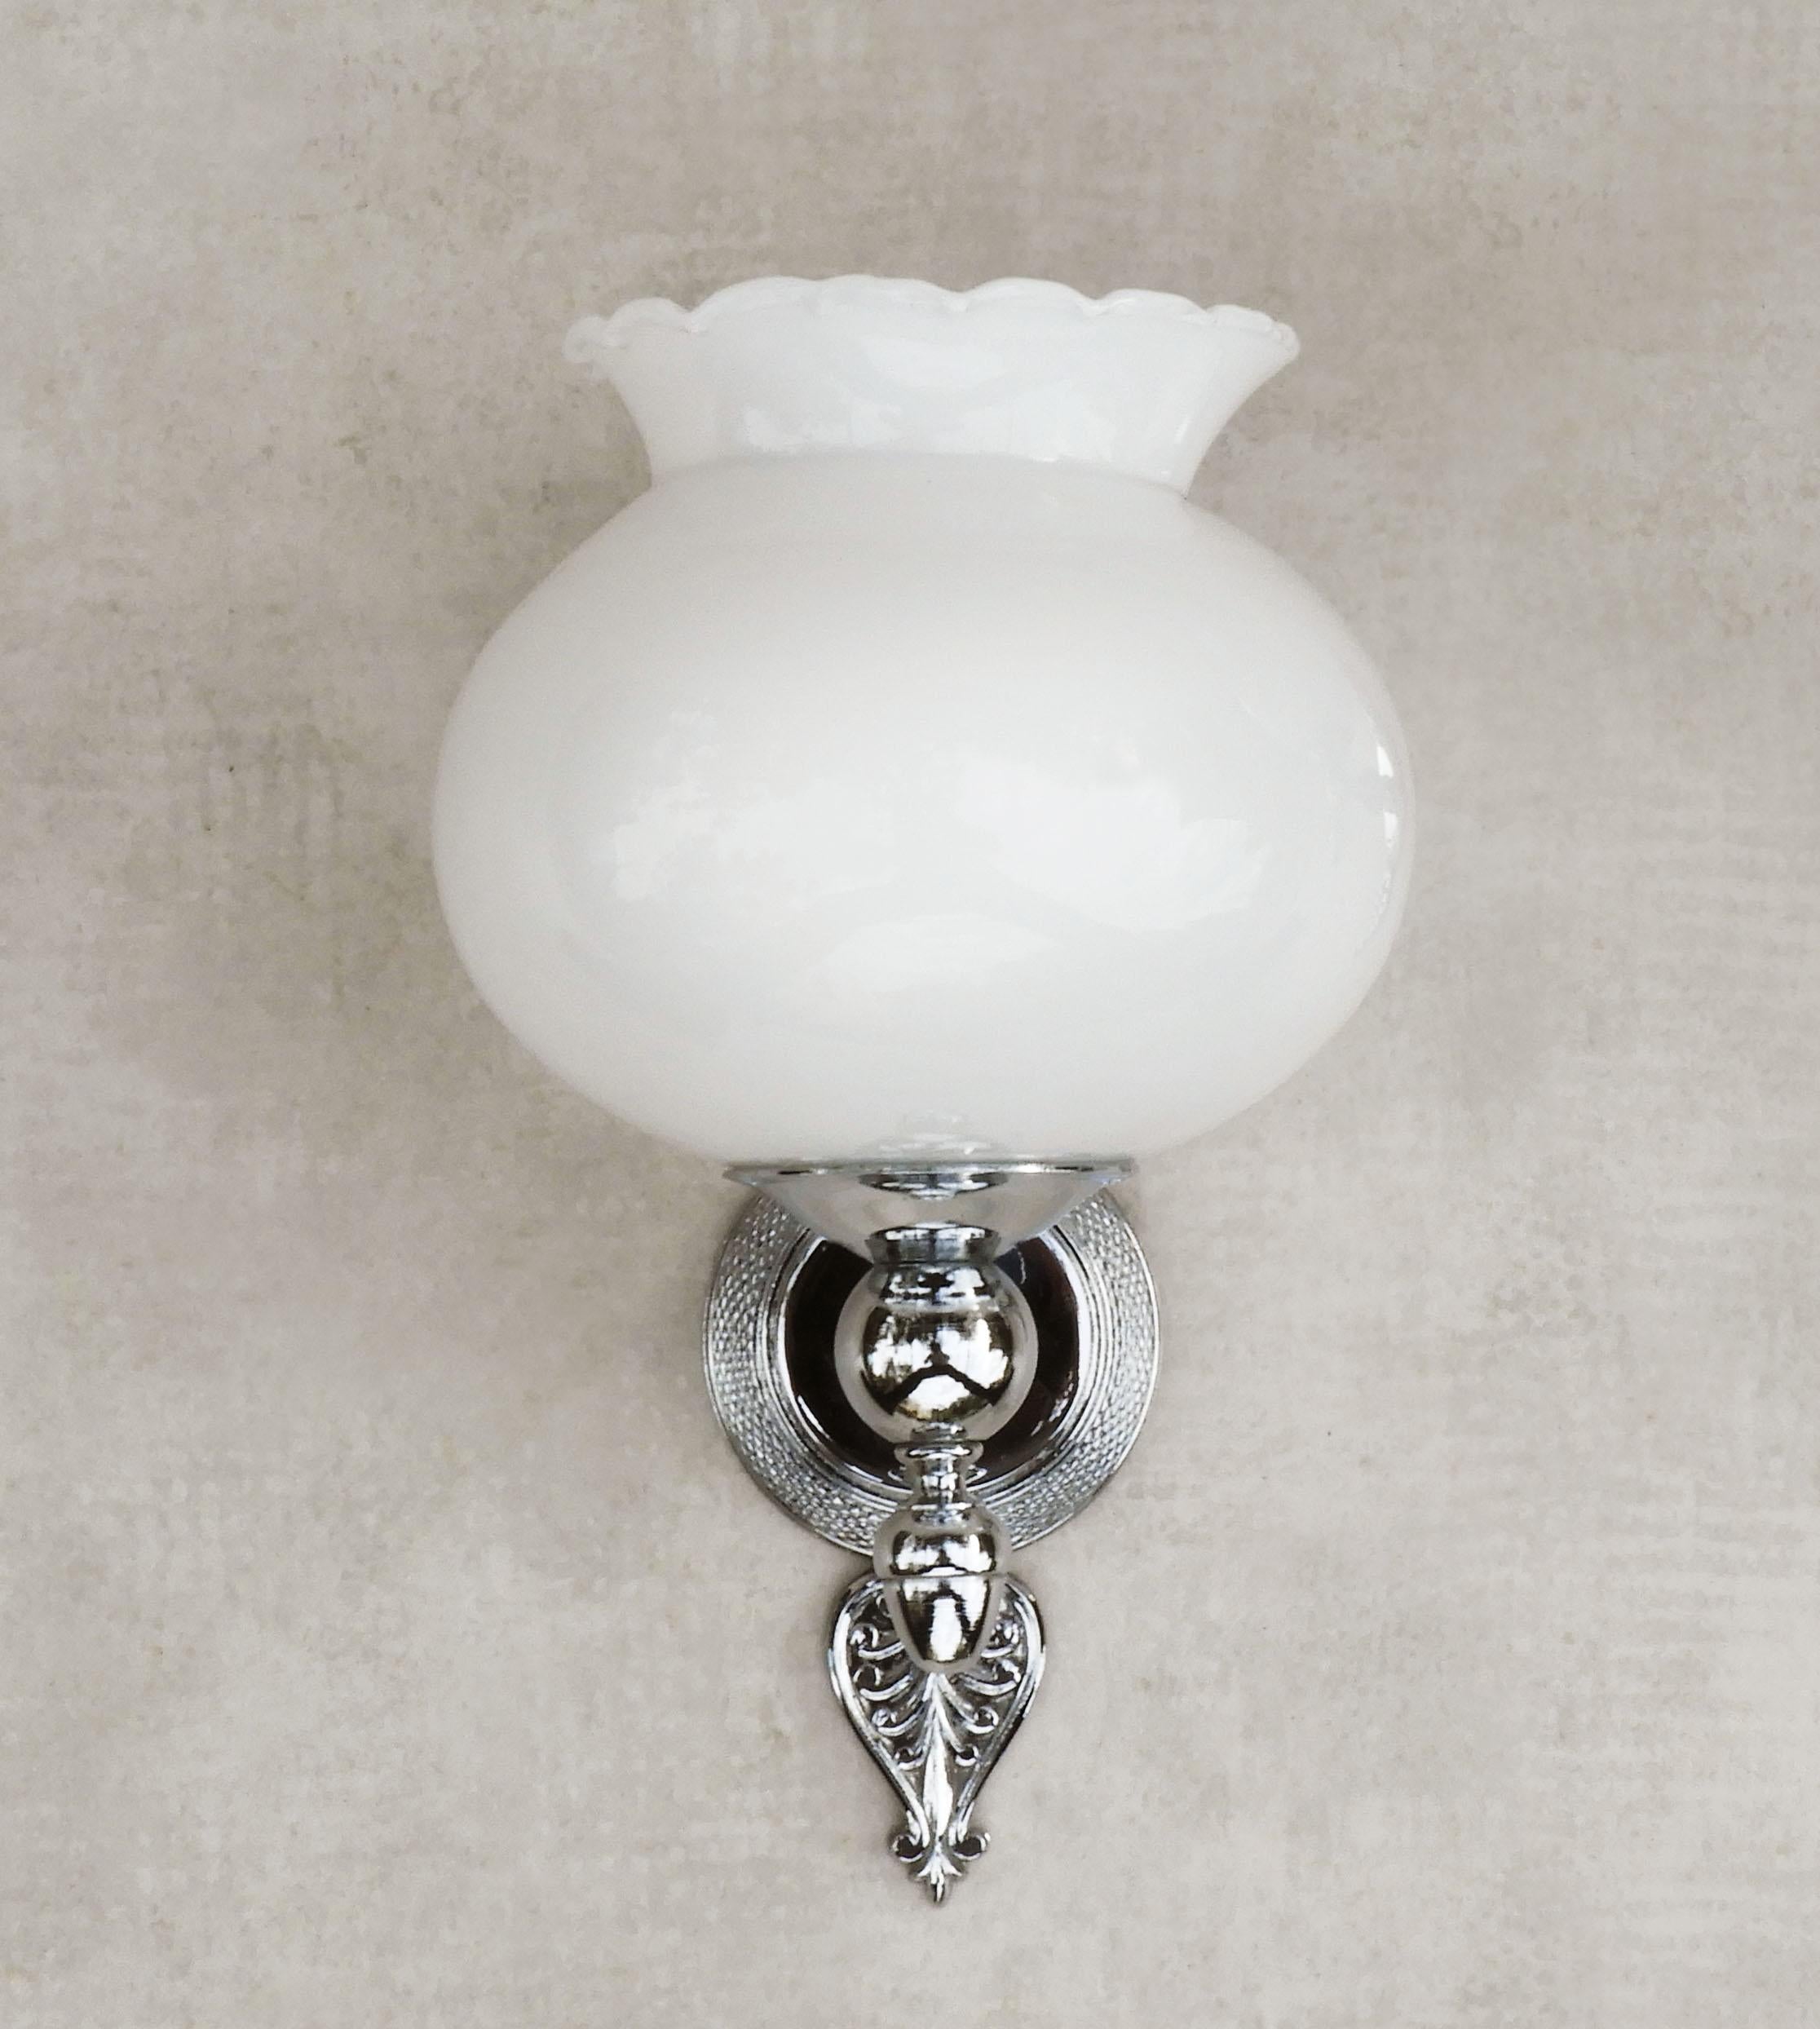 Opaline Glass French Empire Revival Wall Light Sconces in Opaline and Chrome, circa 1970 For Sale